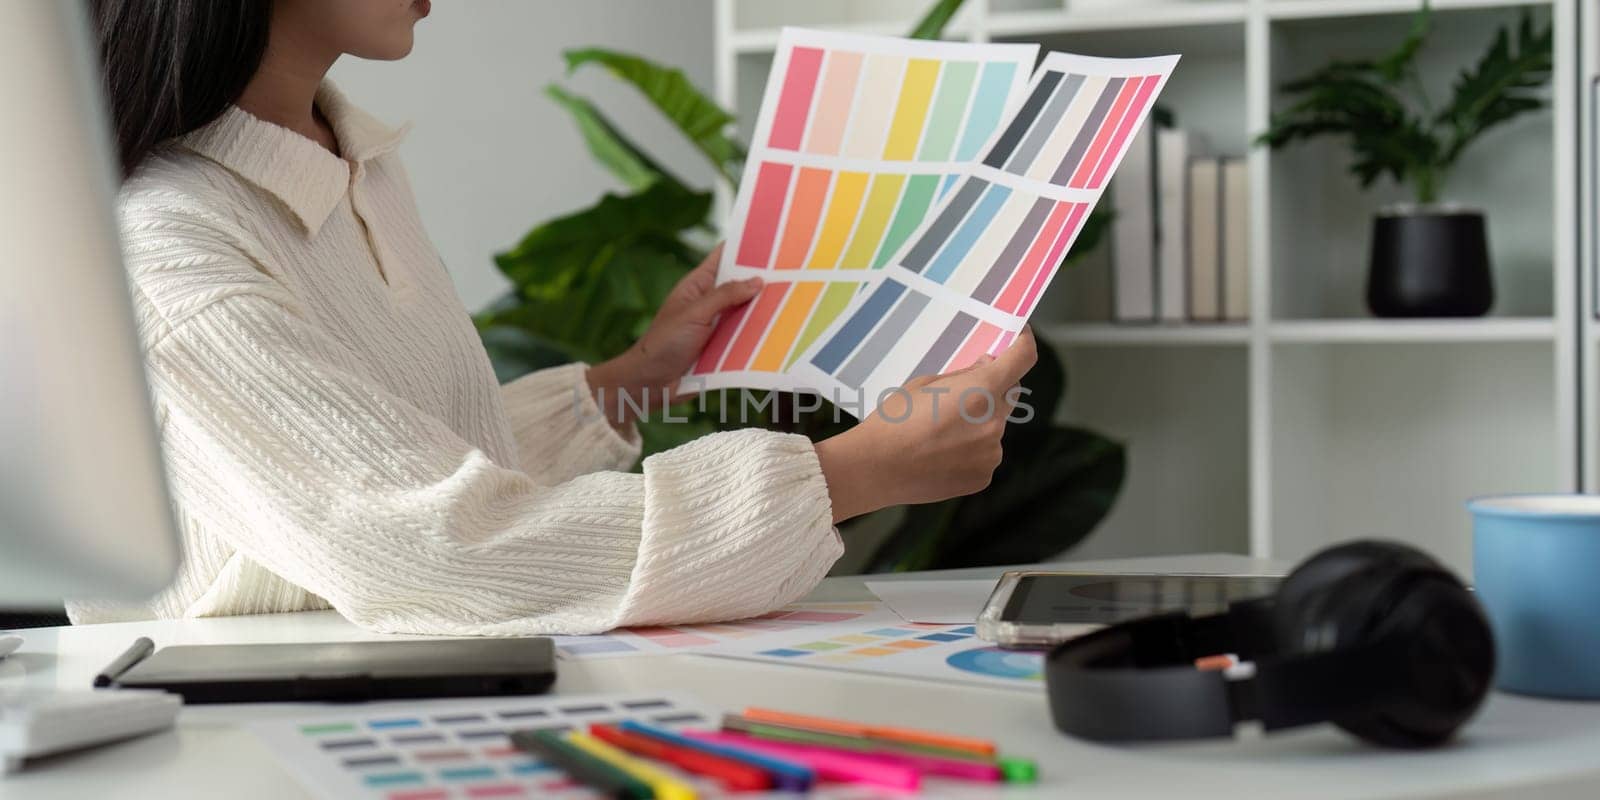 Asian woman freelance graphic designer working with color swatch samples and computer at desk in home office, young lady choosing color gamma for new design project.